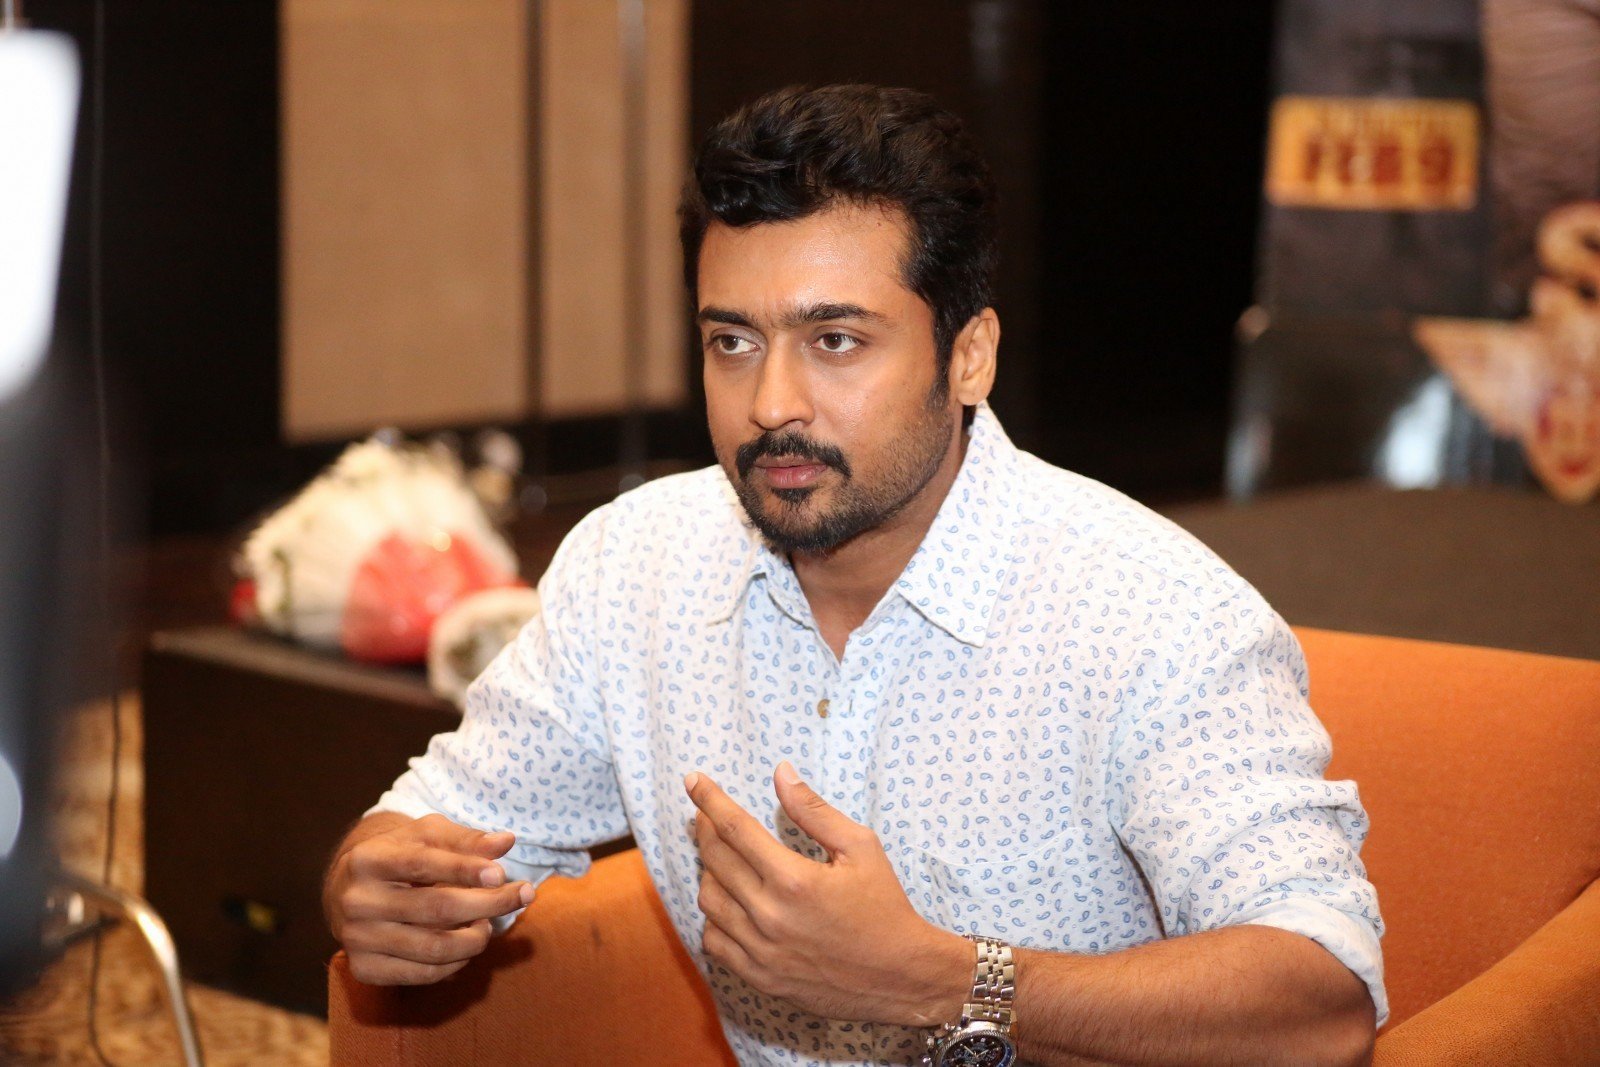 Suriya Interview For Si3 (Singam 3) Photos | Picture 1469940